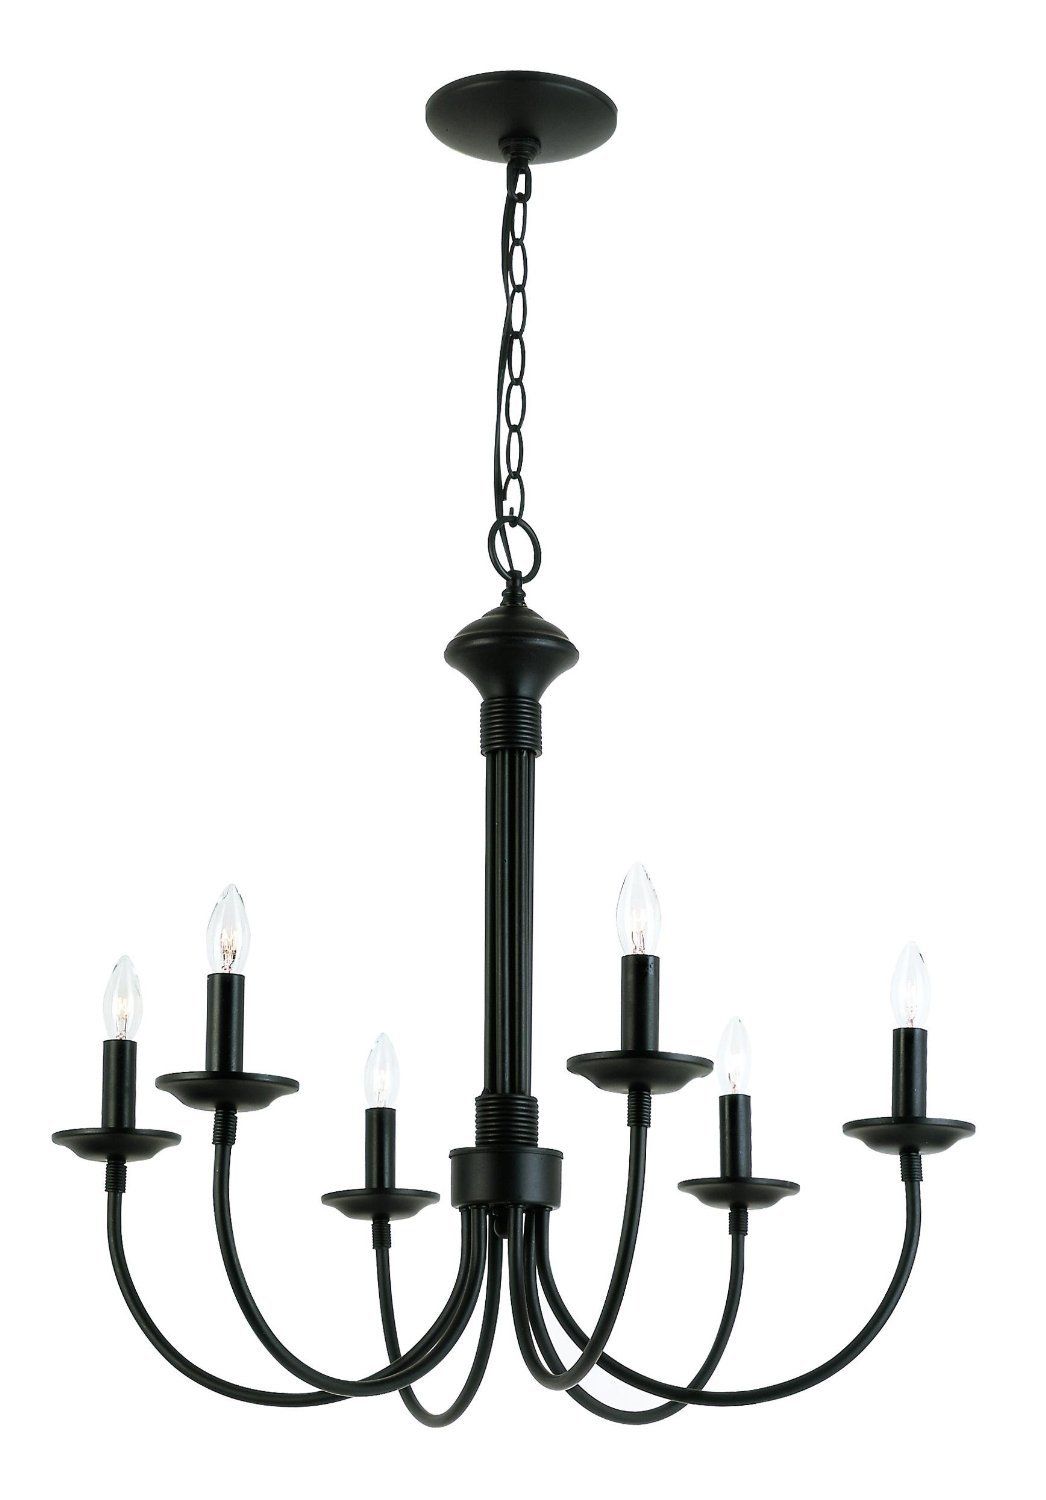 Shaylee 6 Light Candle Style Chandelier With Regard To Shaylee 5 Light Candle Style Chandeliers (View 4 of 30)